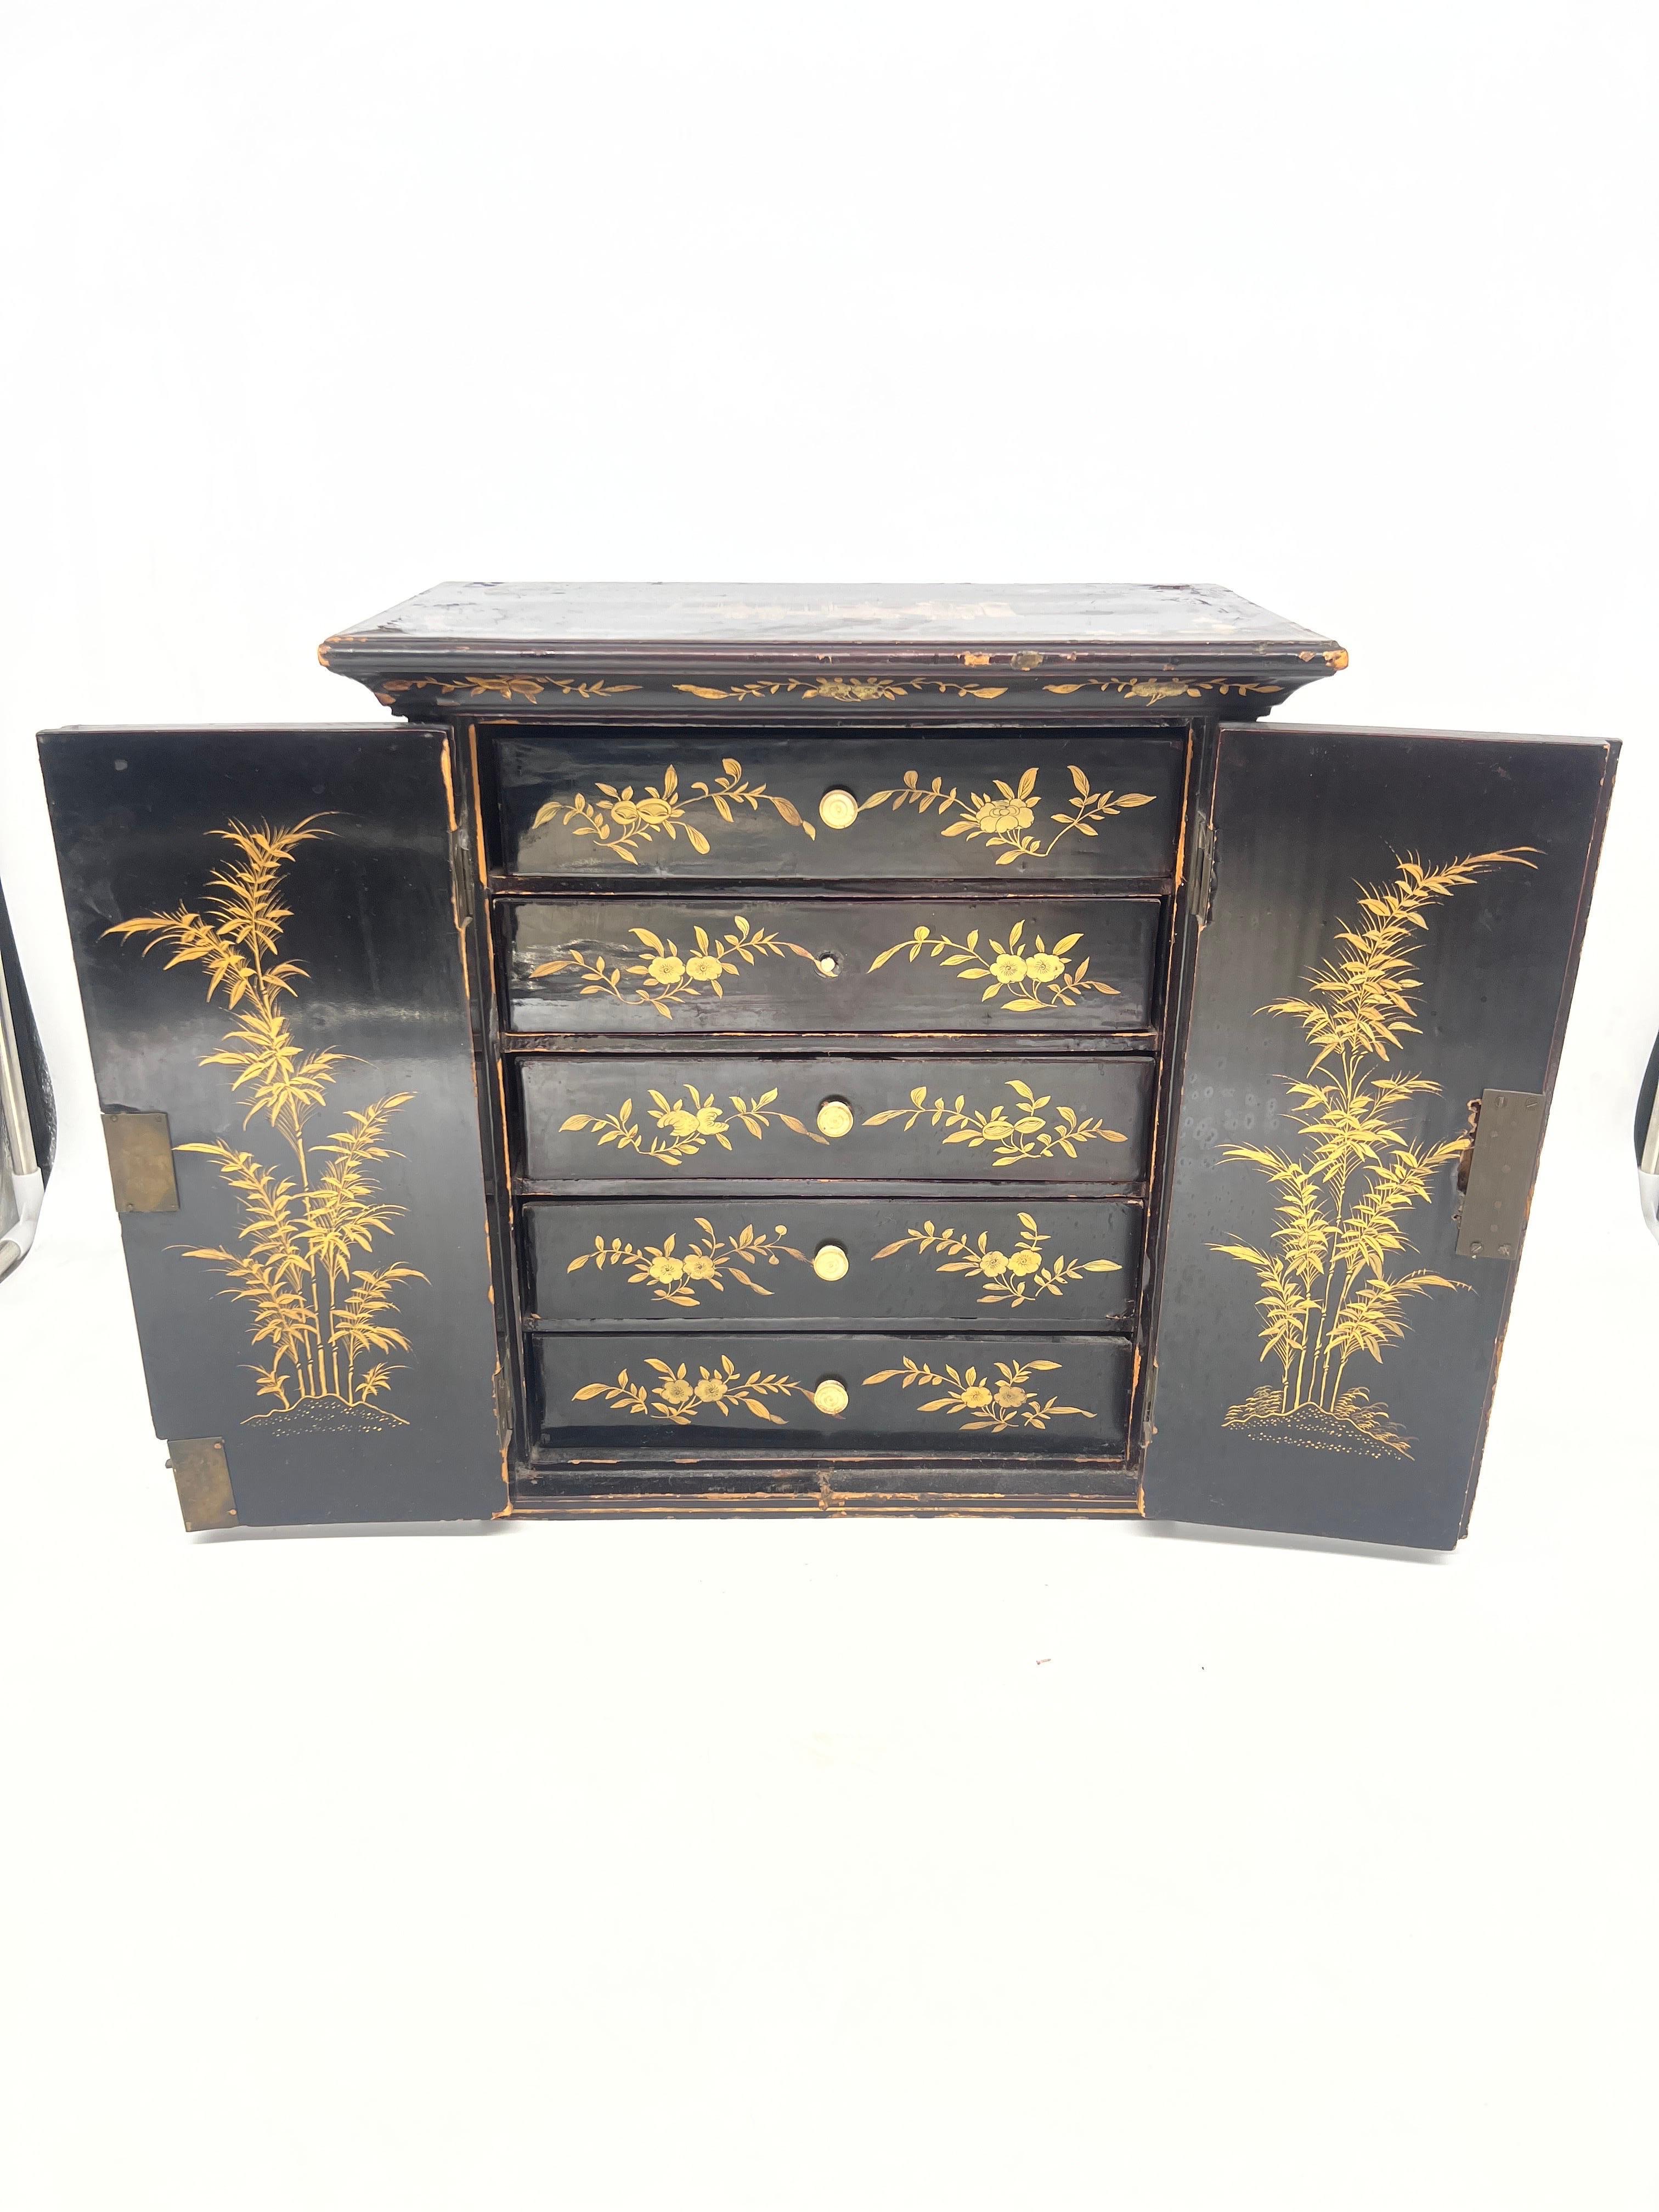 Antique Chinese Export Chinoiserie Decorated Collector or Jewelry Cabinet 1